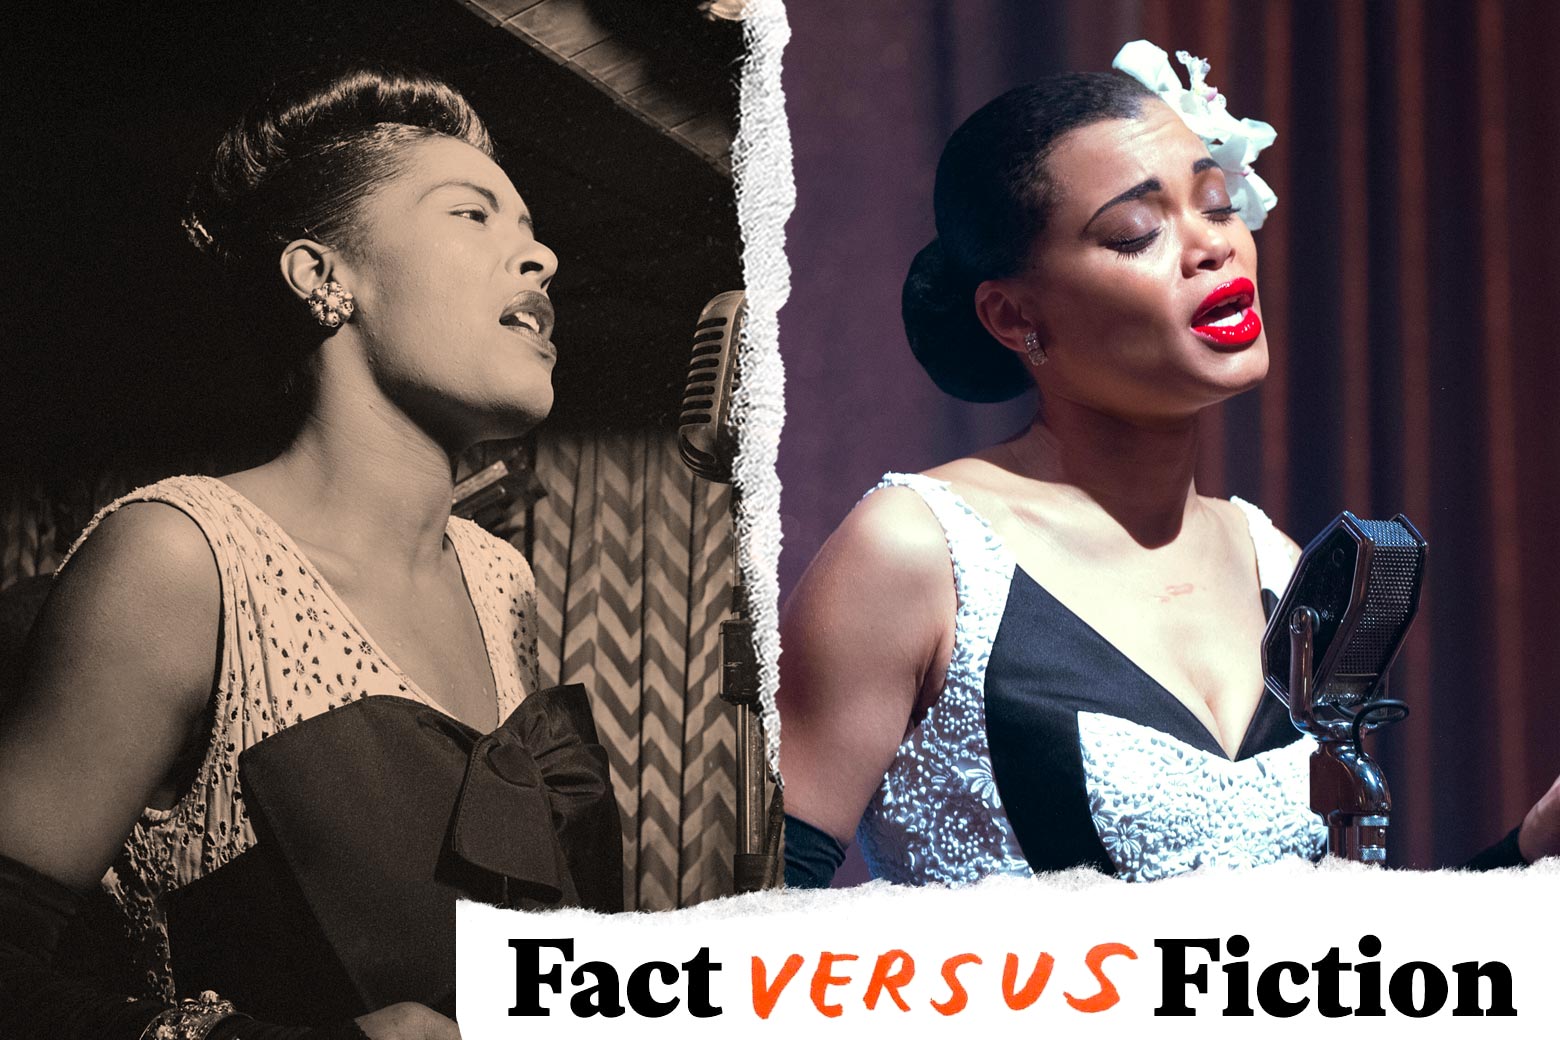 Billie Holiday and Andra Day each singing into a microphone.